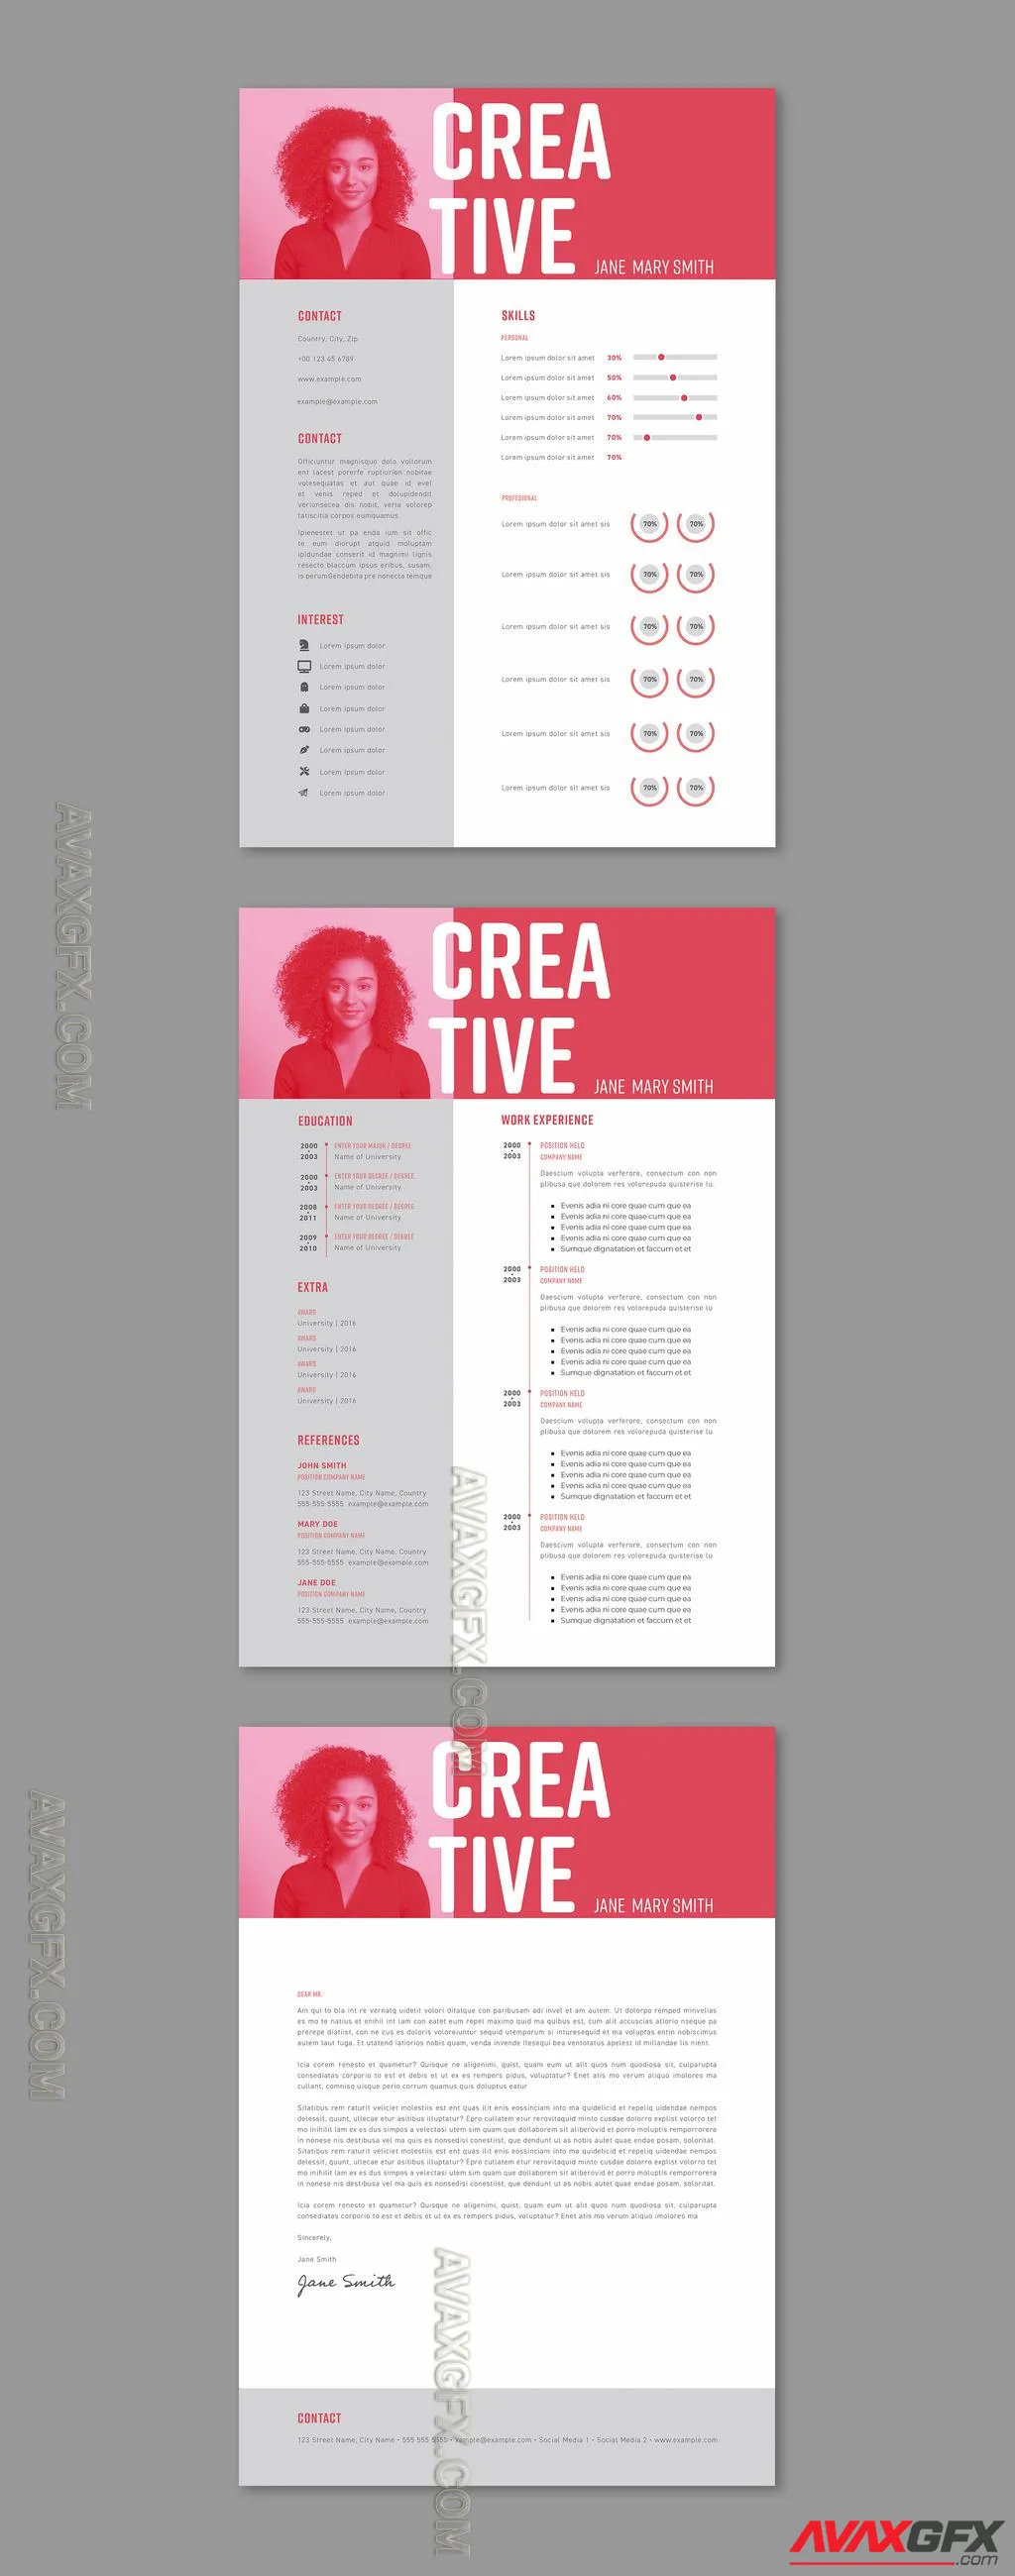 Adobestock - Minimal Resume and Cover Letter with Red Accents 755500084